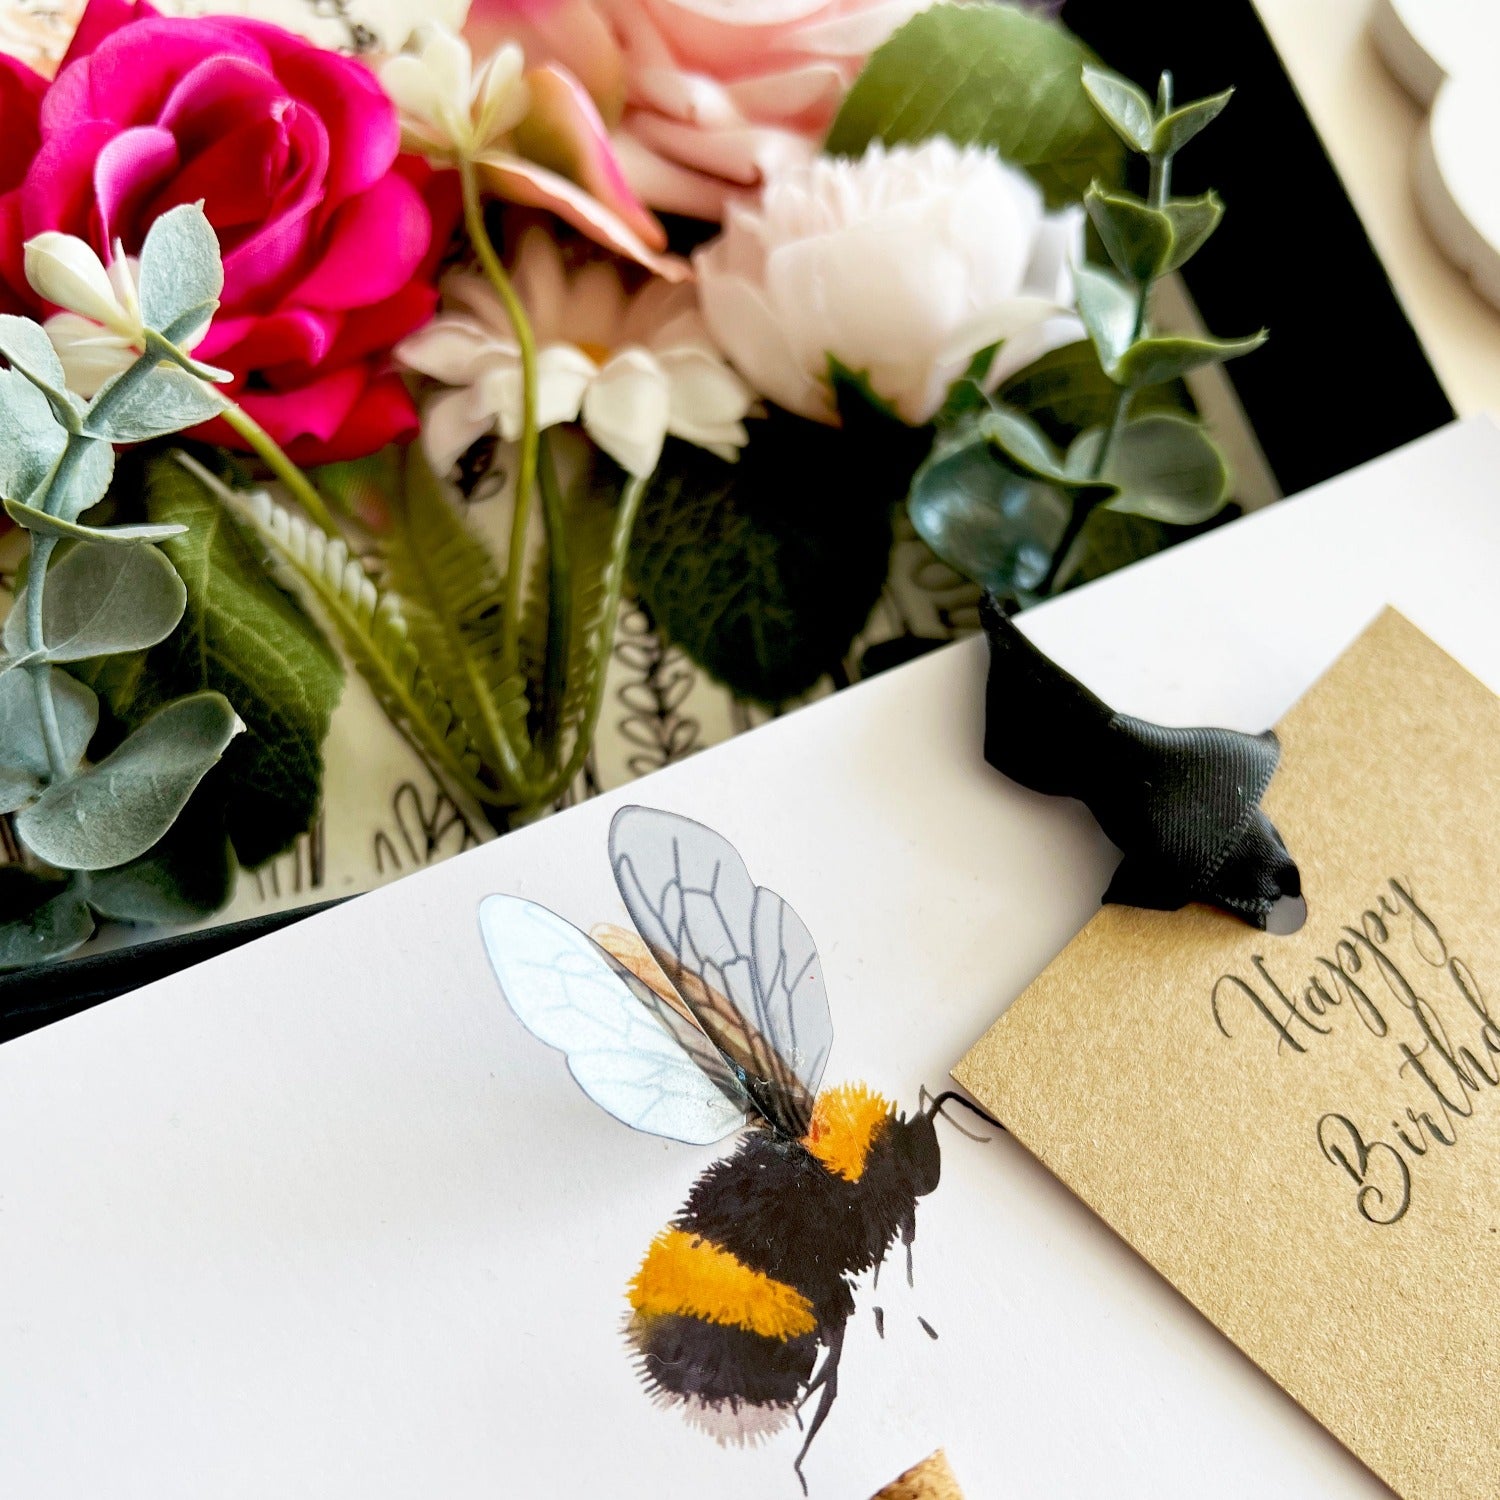 Luxury bee themed cards with 3d dainty wings | The Worlds most luxury gifts and cards from The Luxe Co